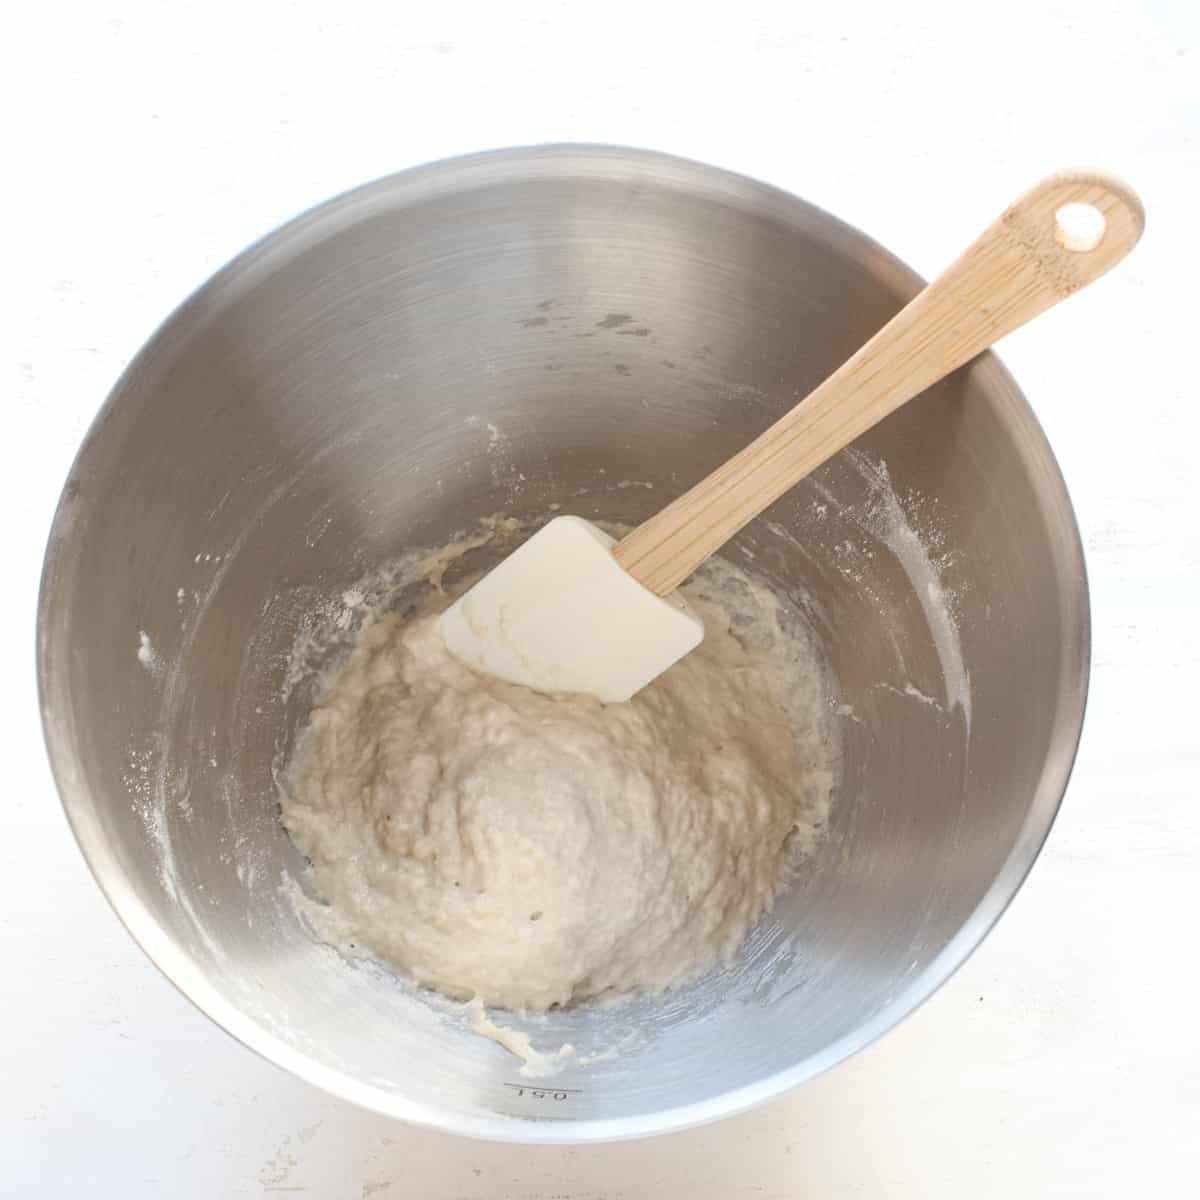 Making yeast starter in a stainless bowl, with spatula.